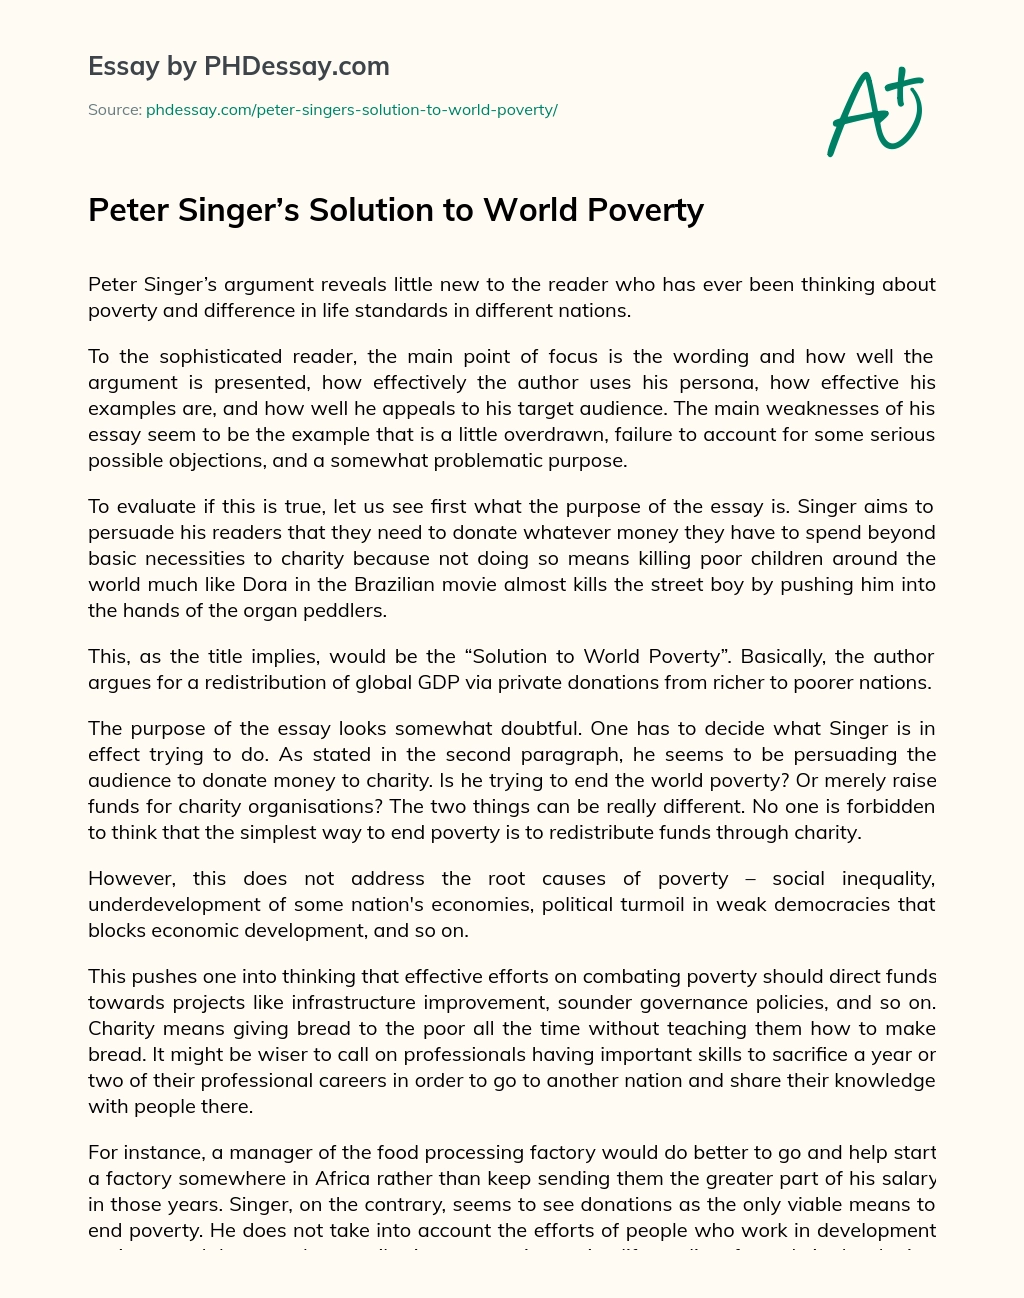 Peter Singer’s Solution to World Poverty essay